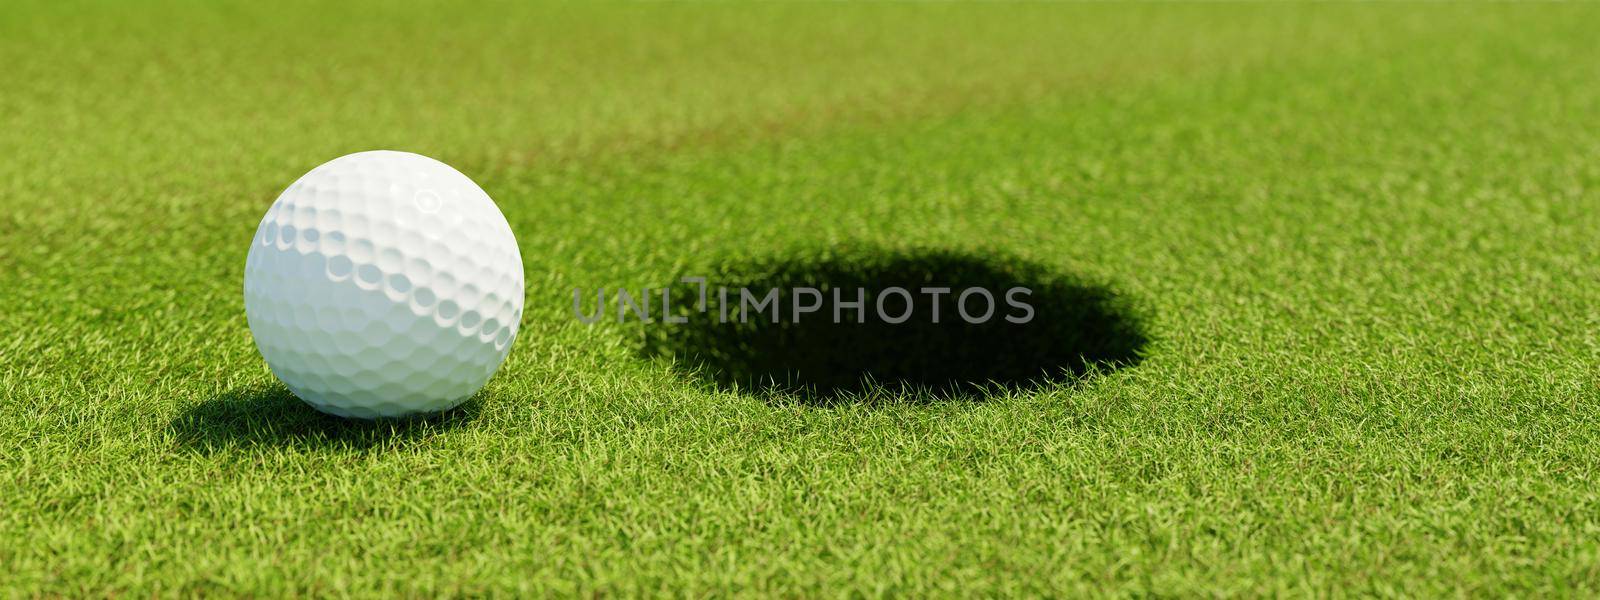 Golf ball on grass in fairway with hole on green background. Sport and athletic concept. Banner for advertising with copy space. 3D illustration rendering